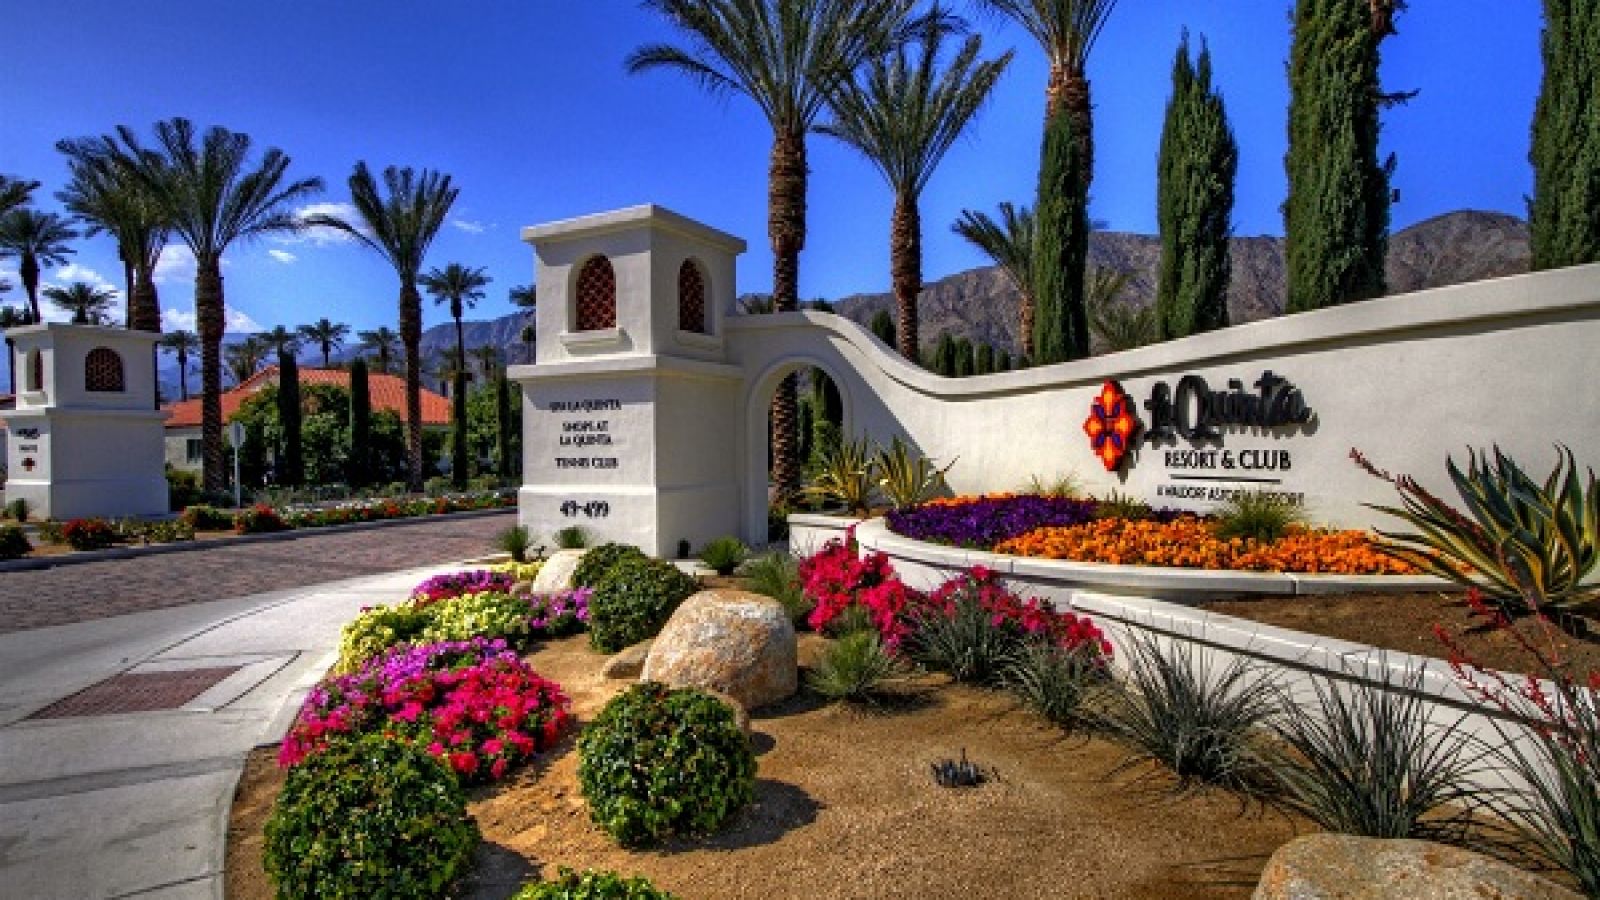 La Quinta Resort & Spa, Palm Springs is perfect for stay and play golf